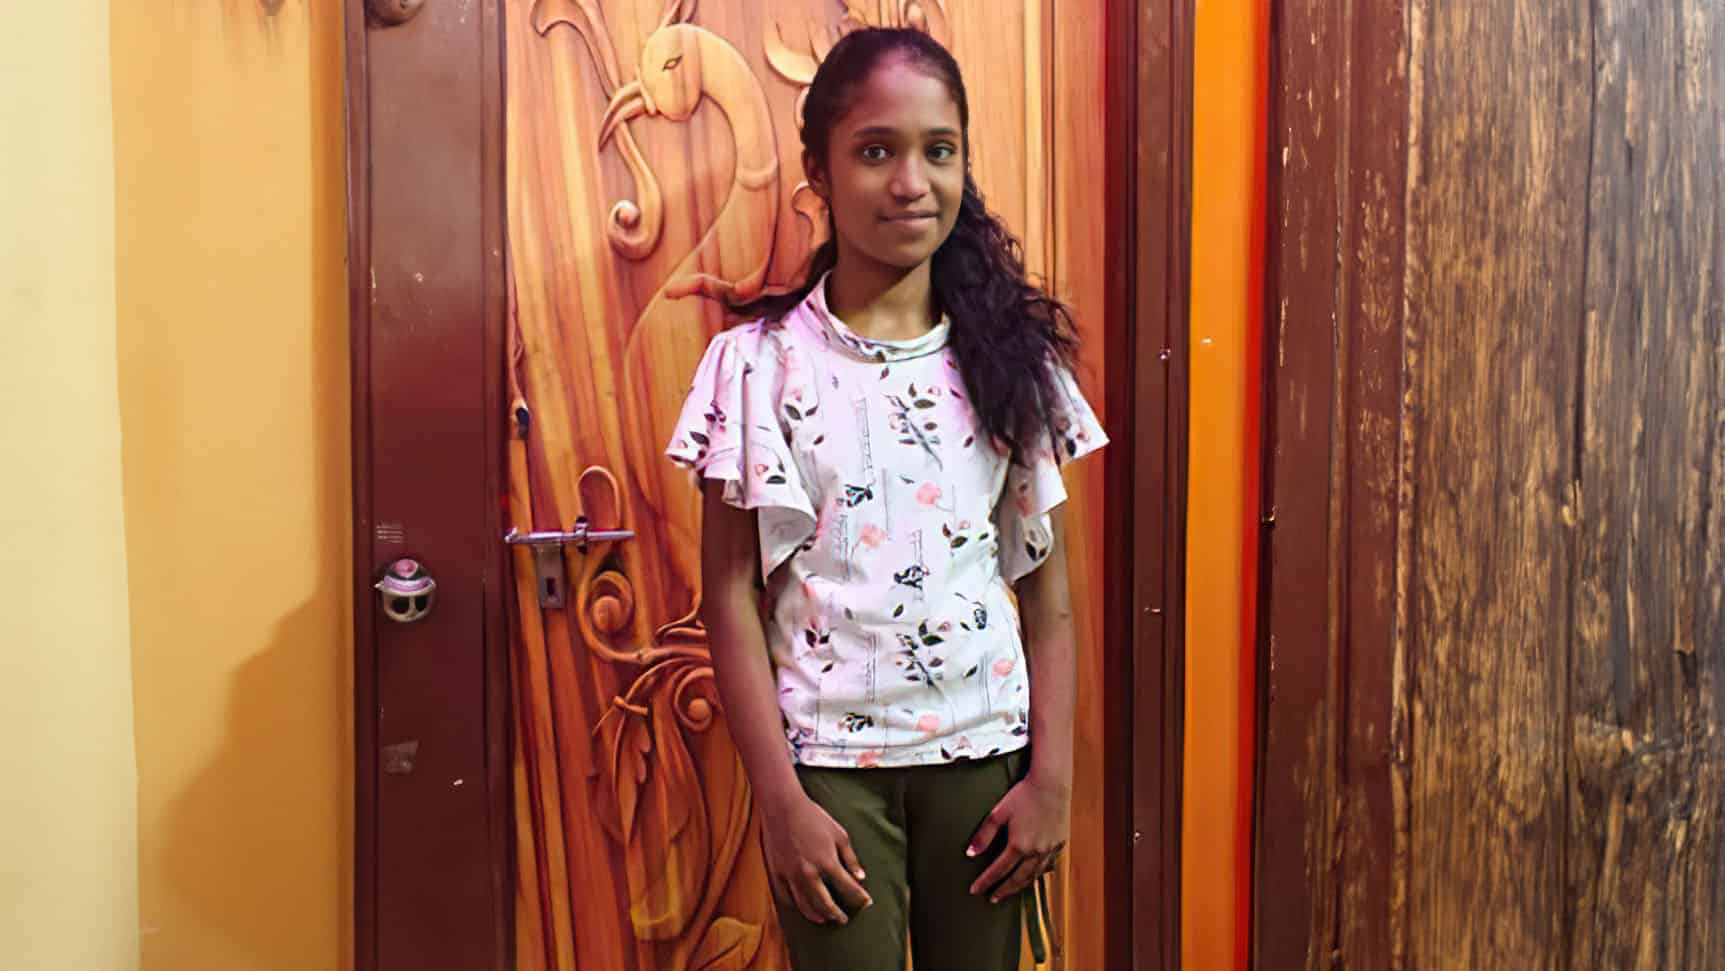 Sanjana, a young girl with a gentle smile stands confidently in front of a colorful wooden door adorned with intricate carvings.